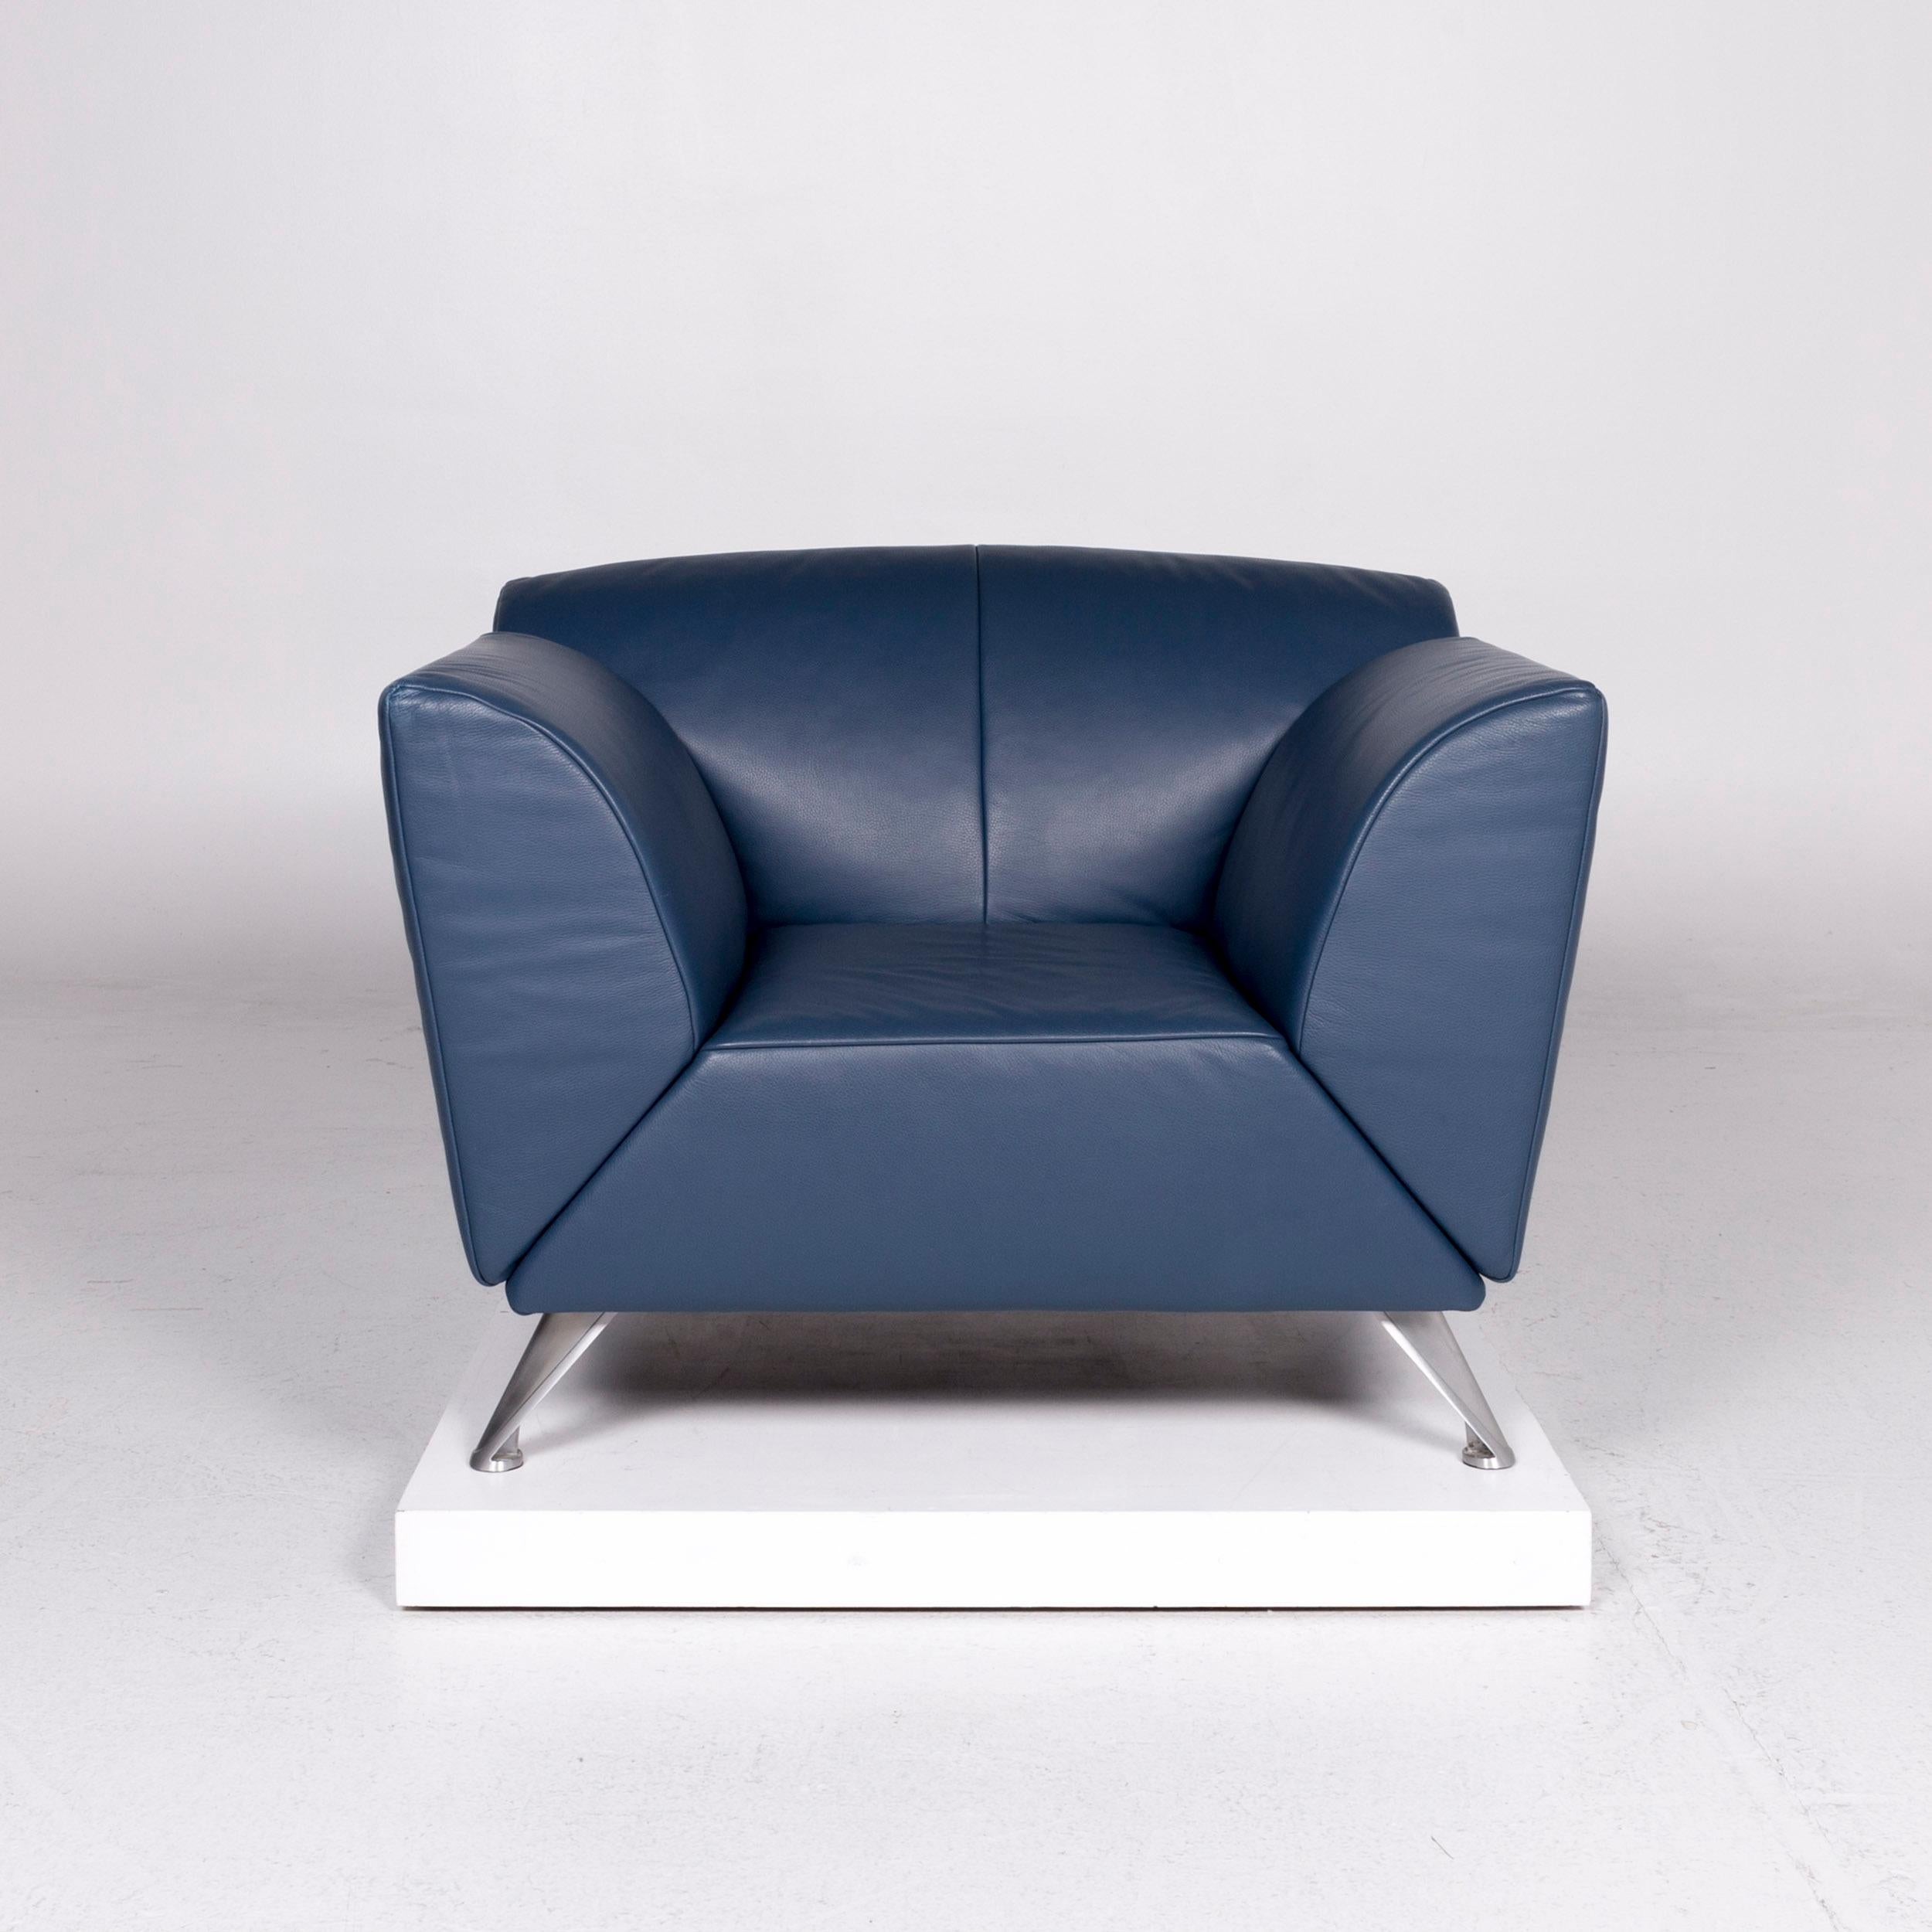 We bring to you a Jori leather armchair blue feature.
 
 Product measurements in centimeters:
 
Depth 86
Width 103
Height 75
Seat-height 41
Rest-height 68
Seat-depth 57
Seat-width 47
Back-height 37.
   